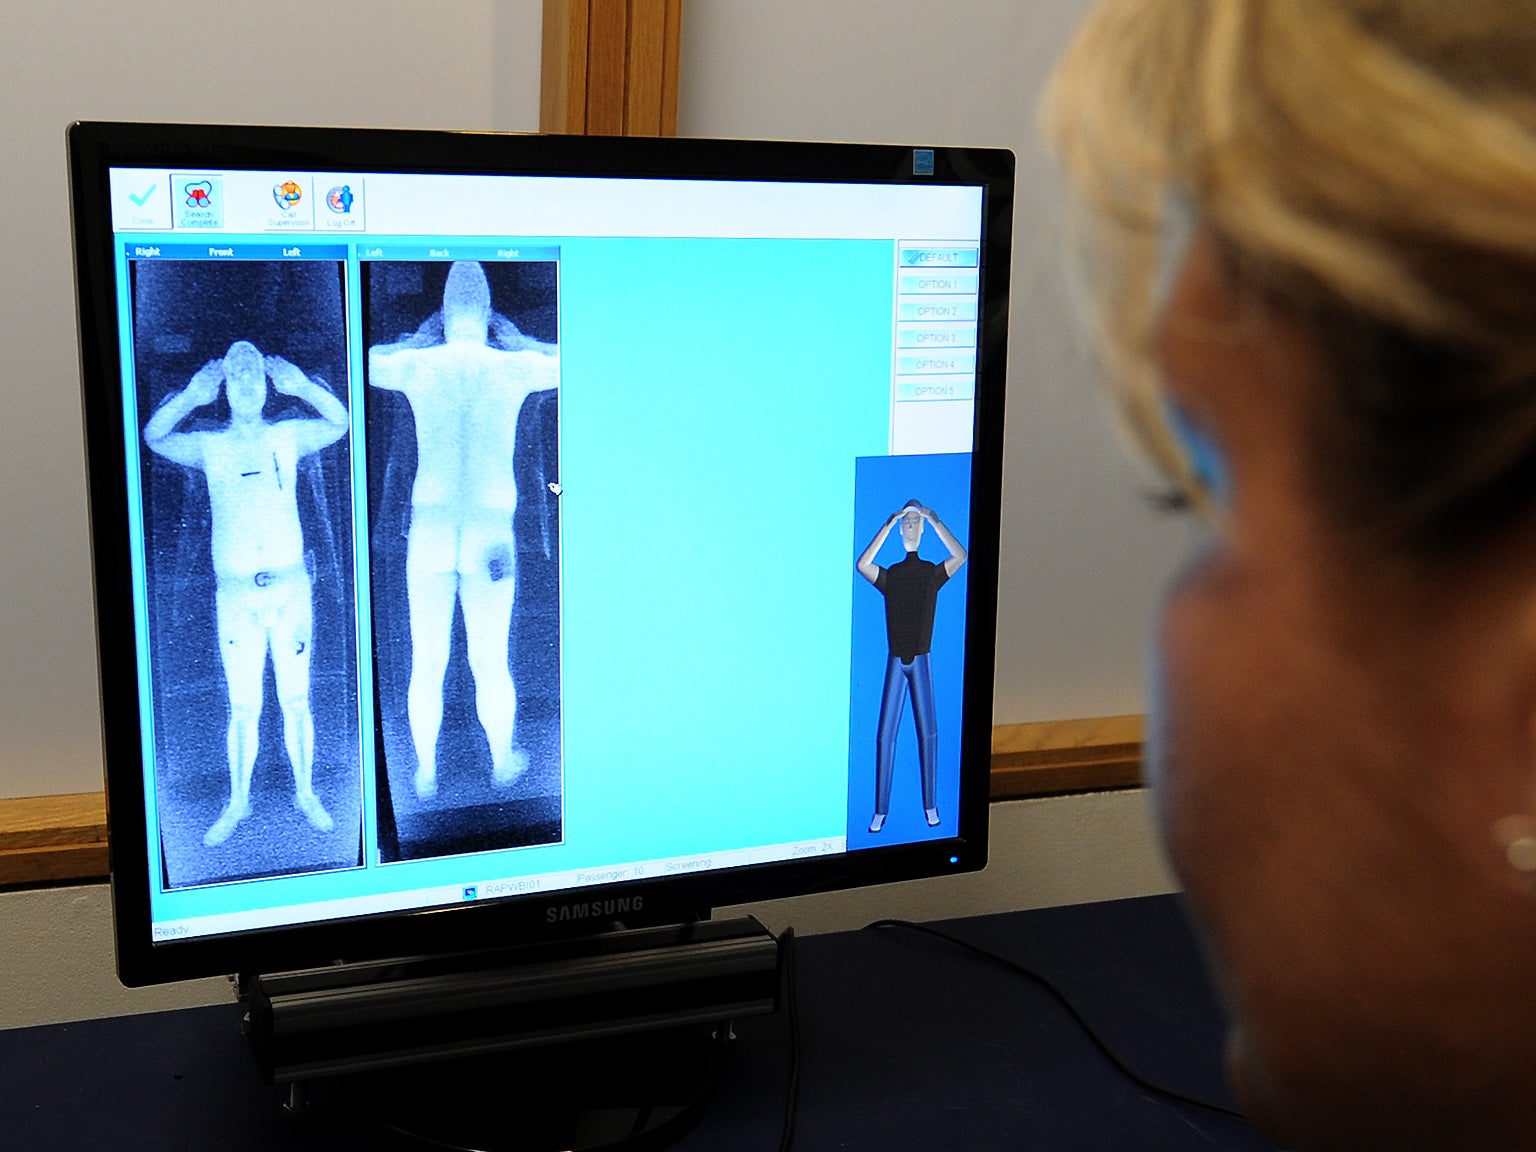 January 2010: A security officer views images from the body scanner at Manchester Airport